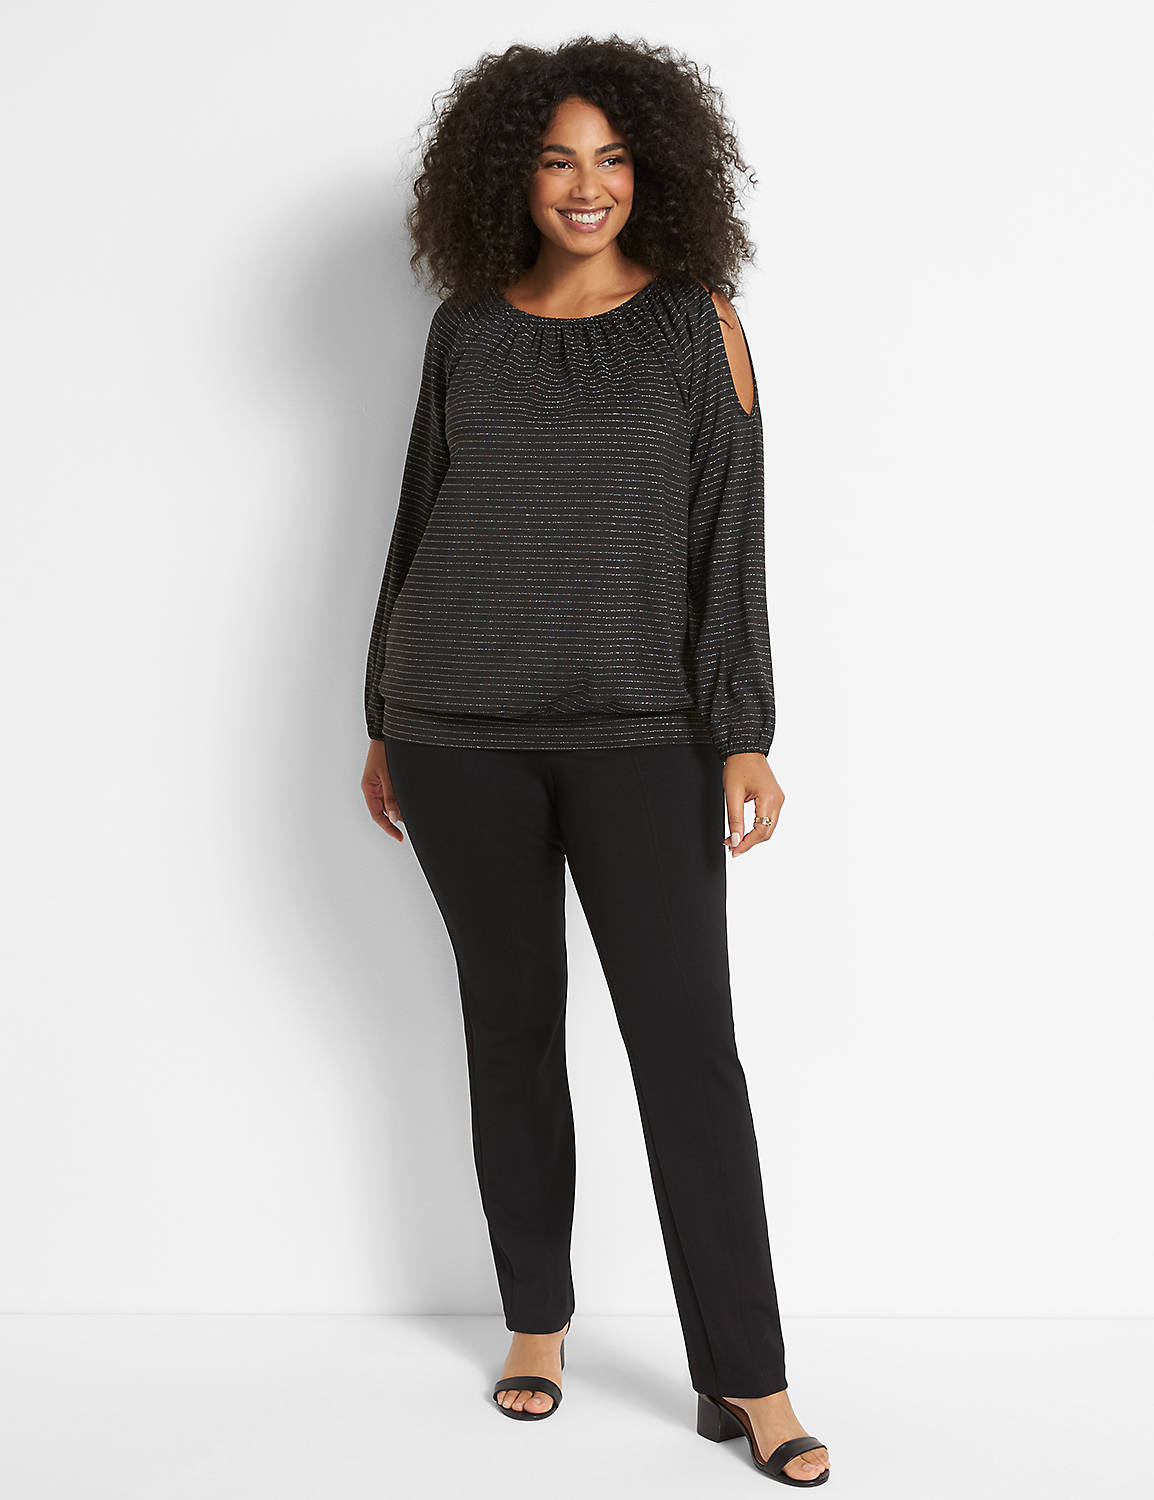 Long Sleeve With Cutout Deep Boat Neck Knit Top 1124636:Black:10/12 Product Image 3